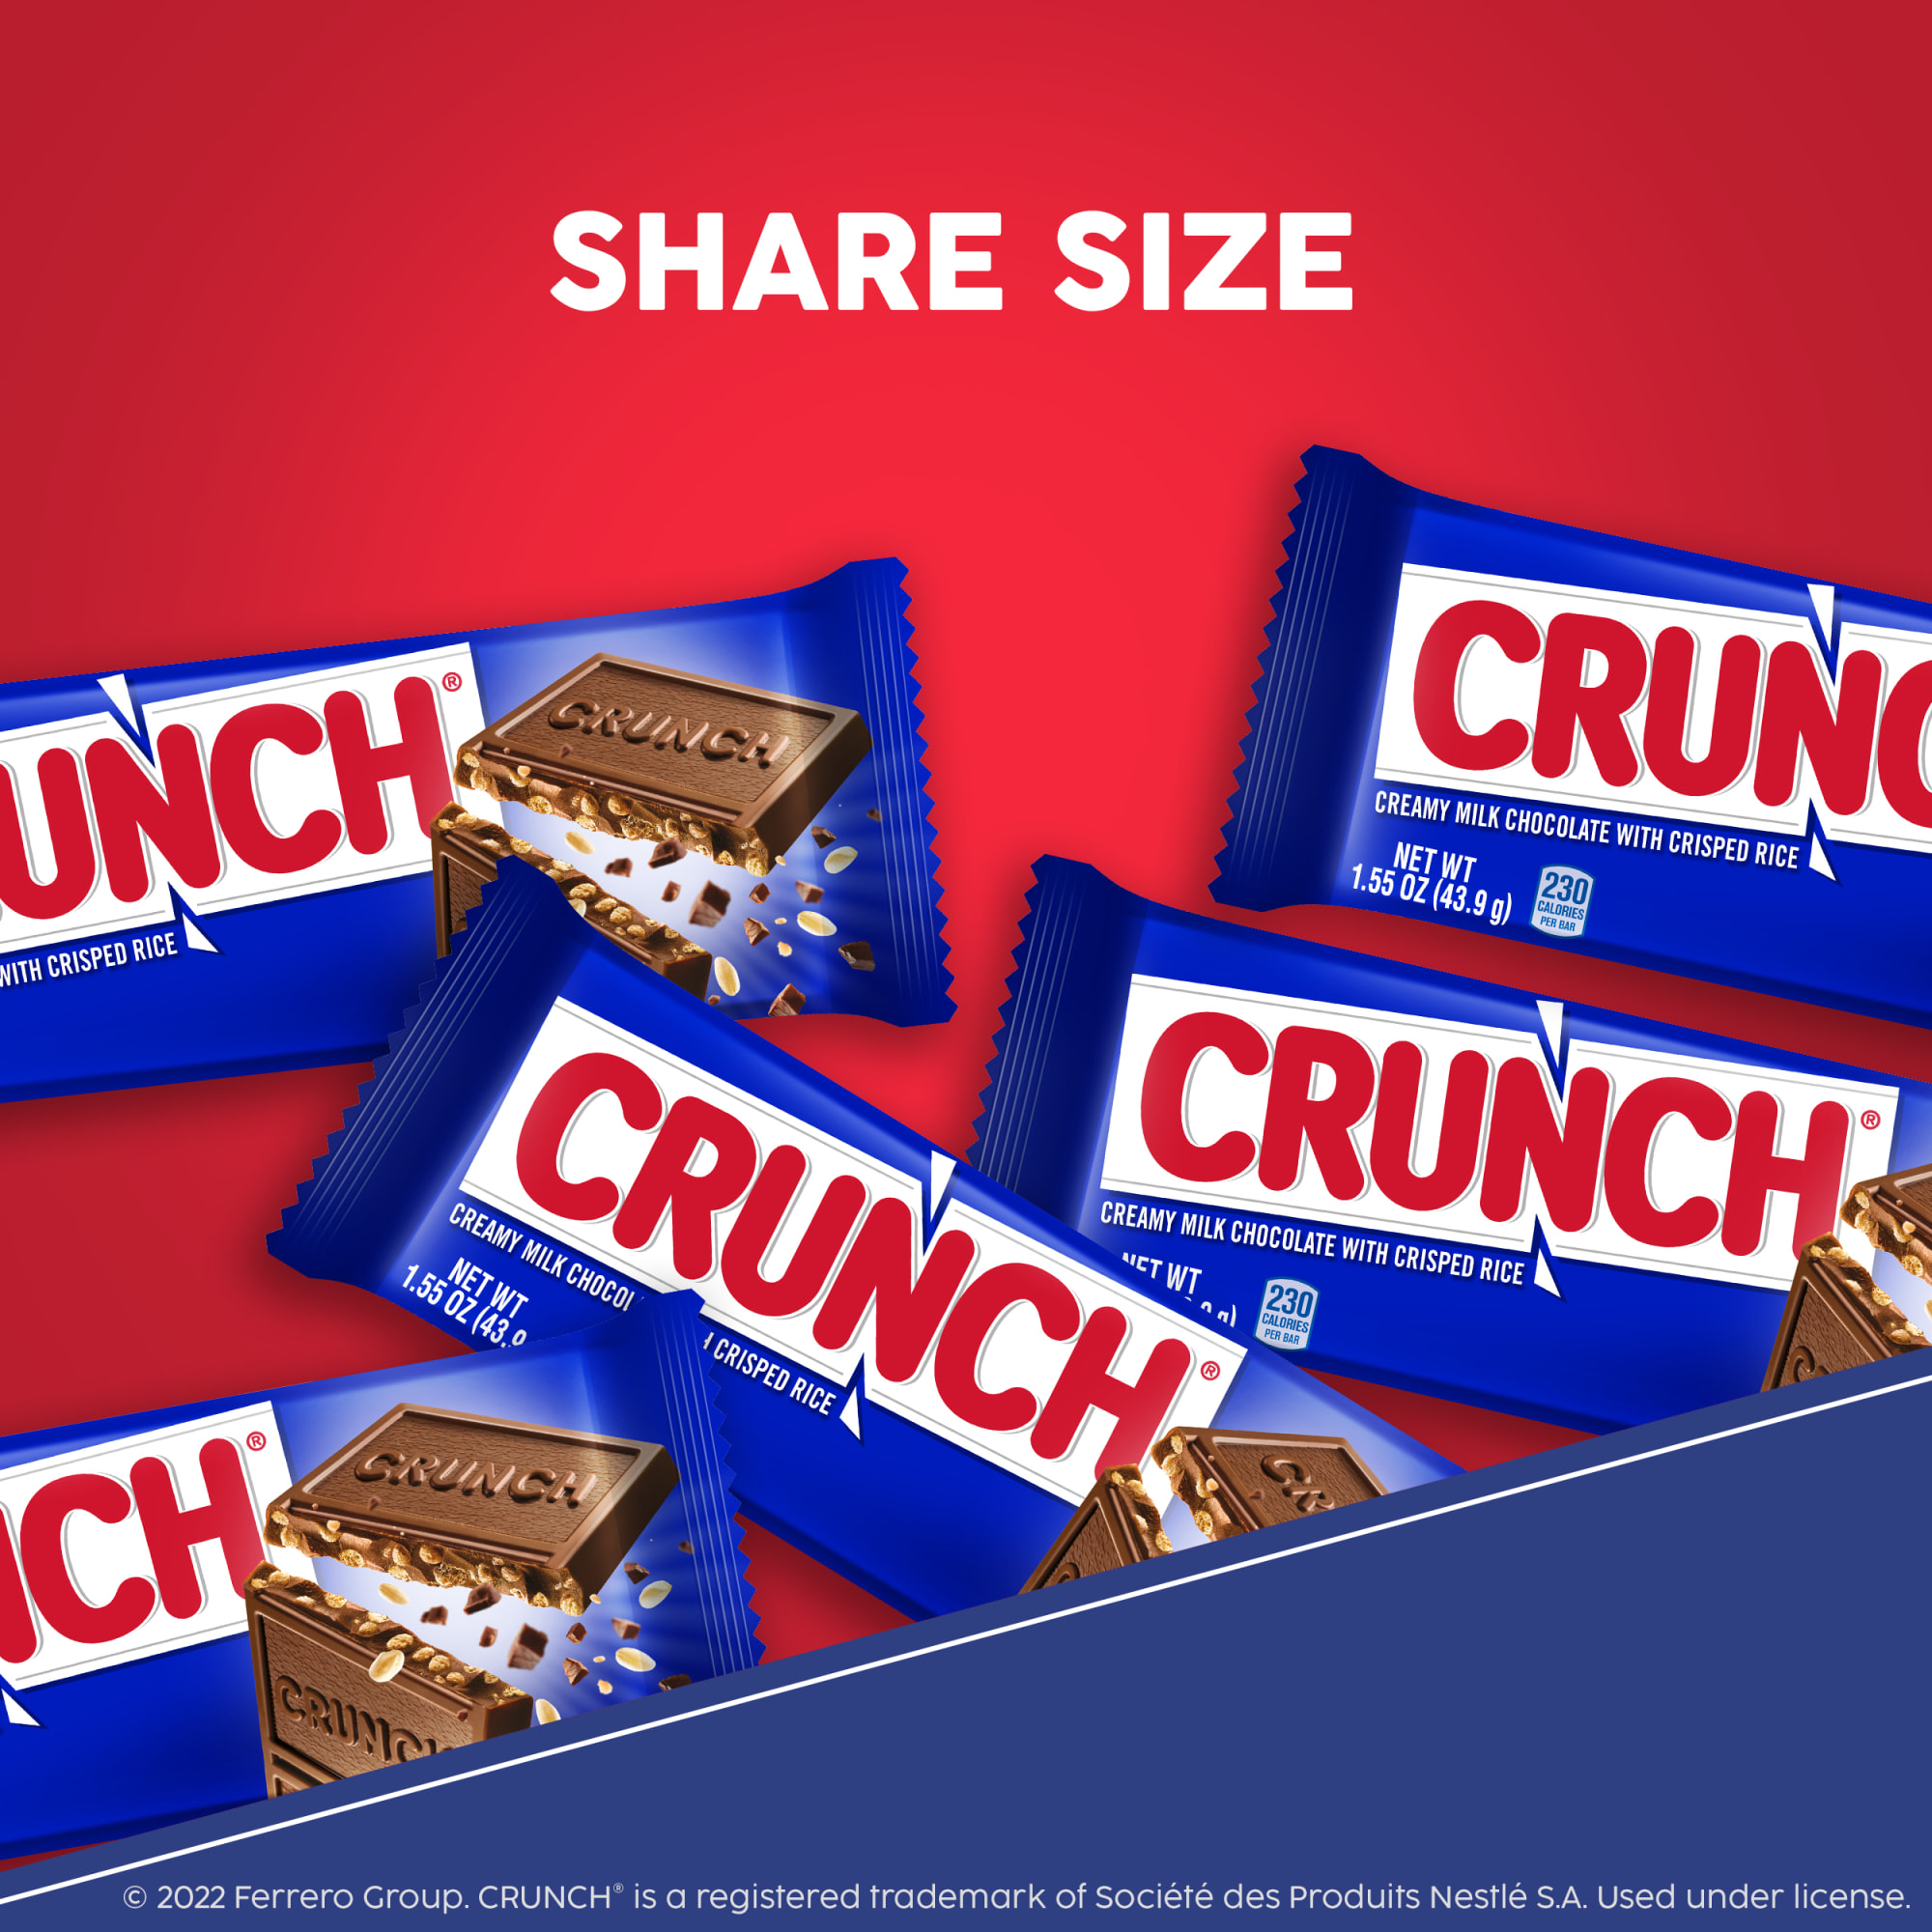 CRUNCH Milk Chocolate and Crisped Rice, Share Size Candy Bars, Share Pack, 2.7 oz - image 3 of 9